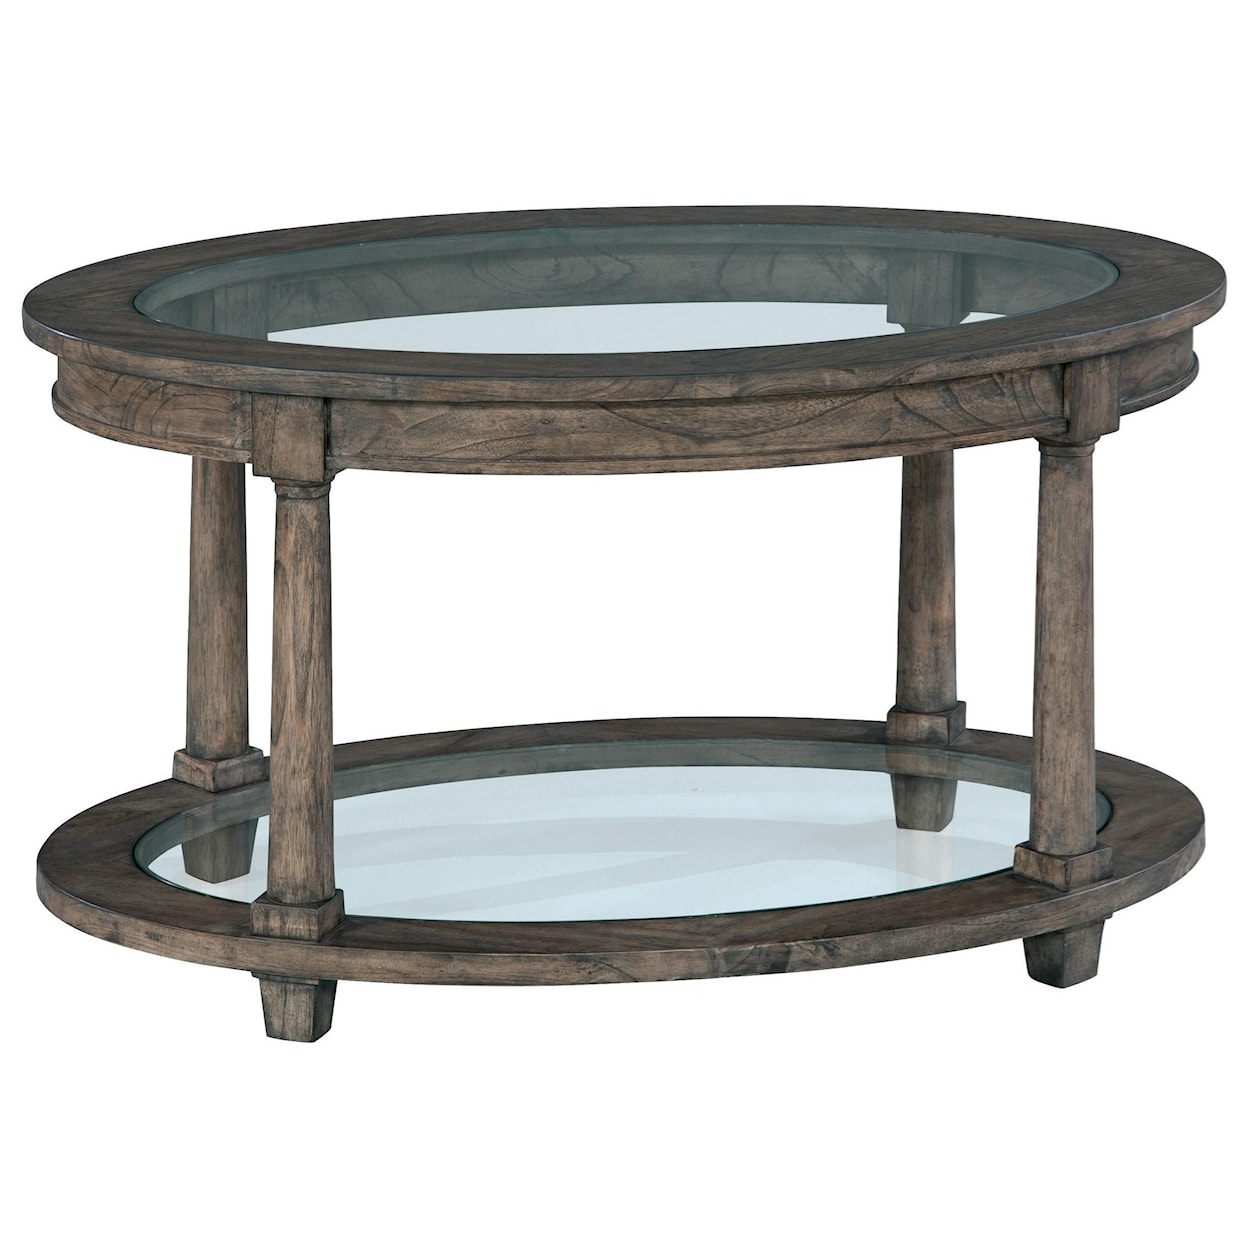 Hekman Lincoln Park Oval Coffee Table